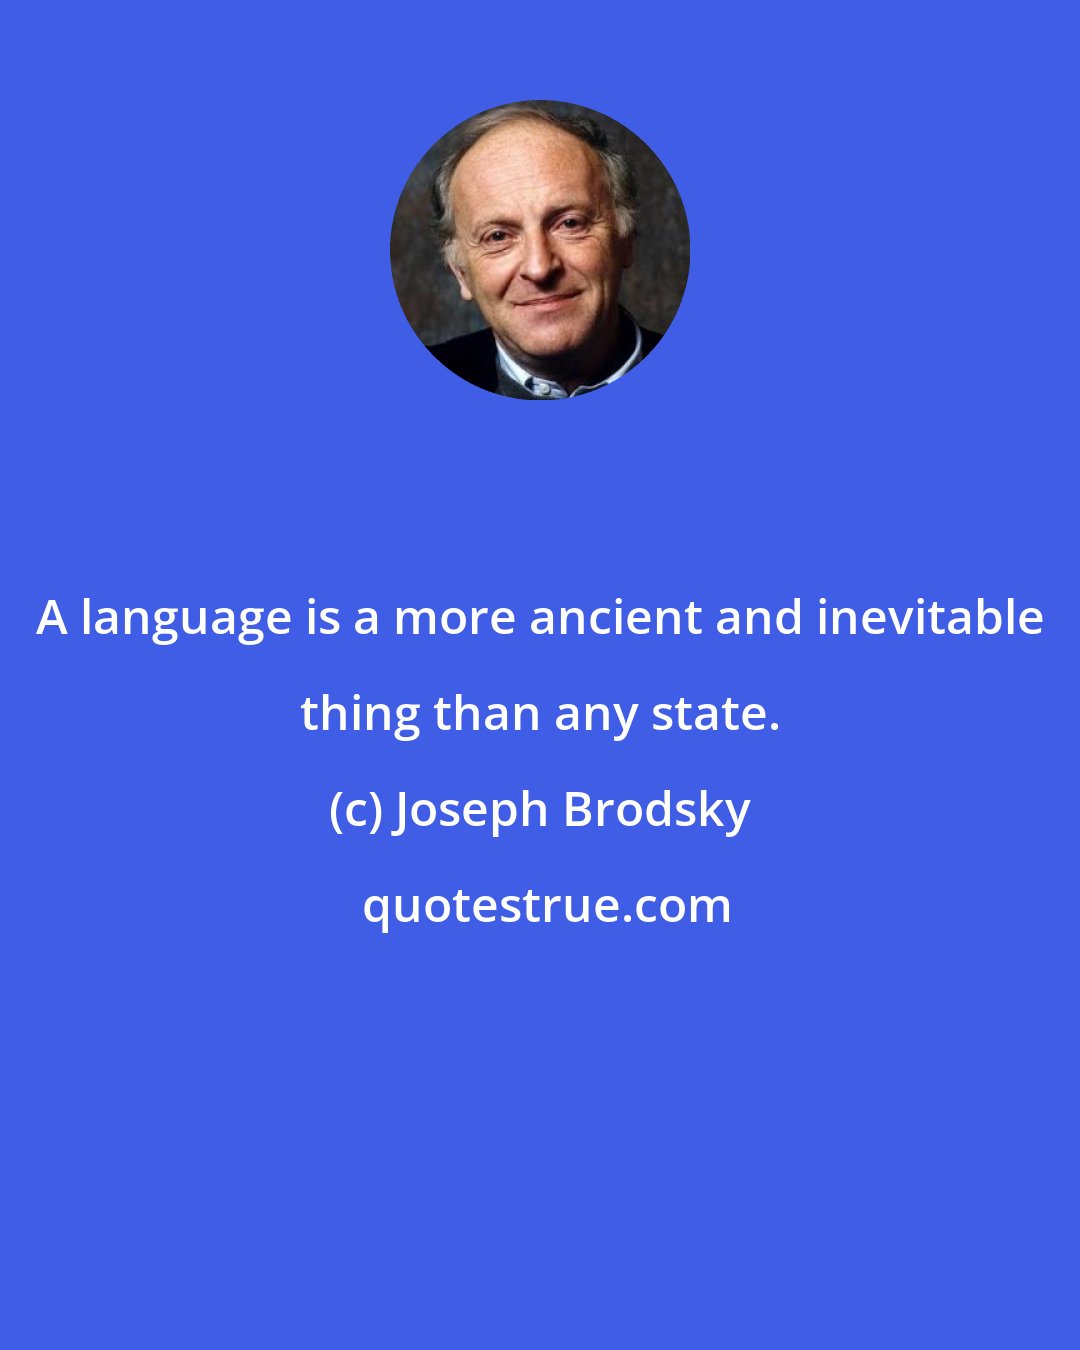 Joseph Brodsky: A language is a more ancient and inevitable thing than any state.